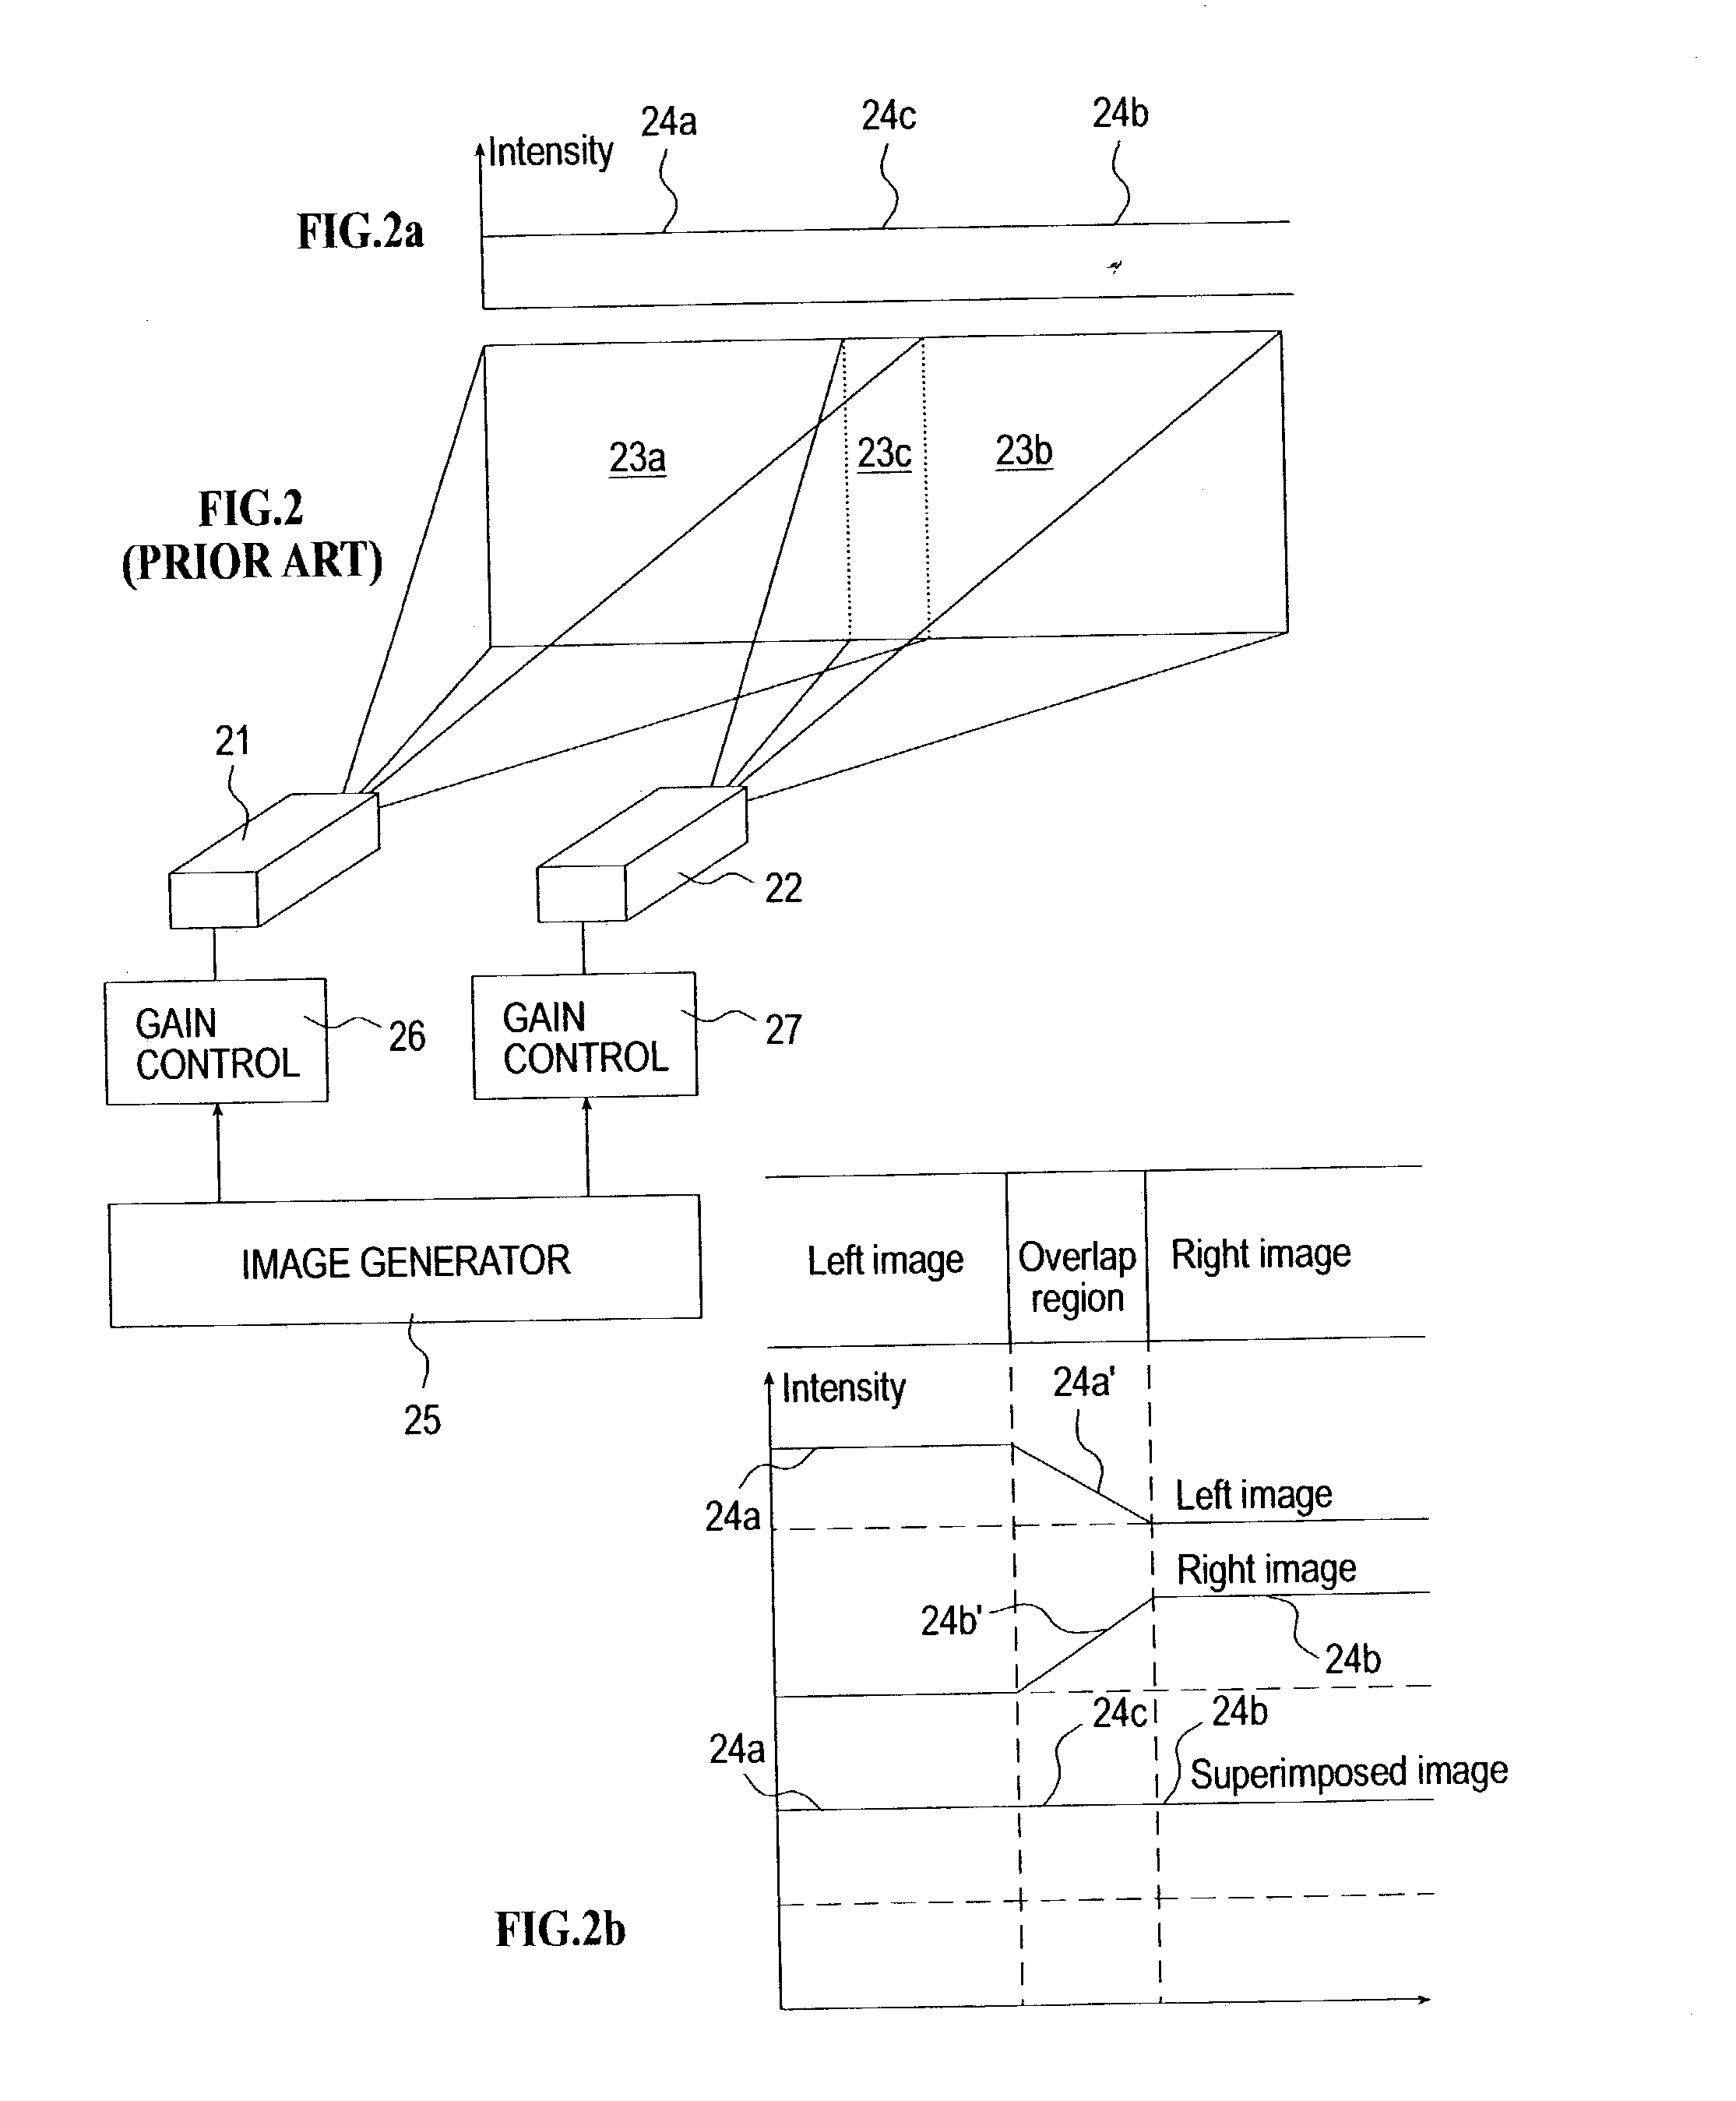 Producing smooth edge transitions in displayed composite images